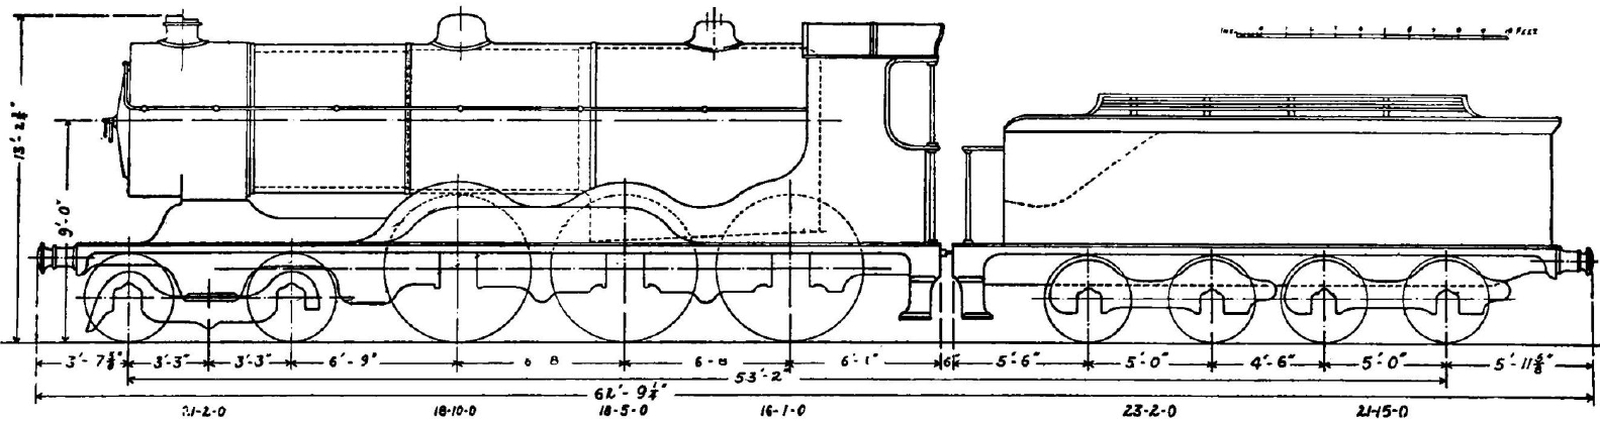 Schematic drawing with dimensions